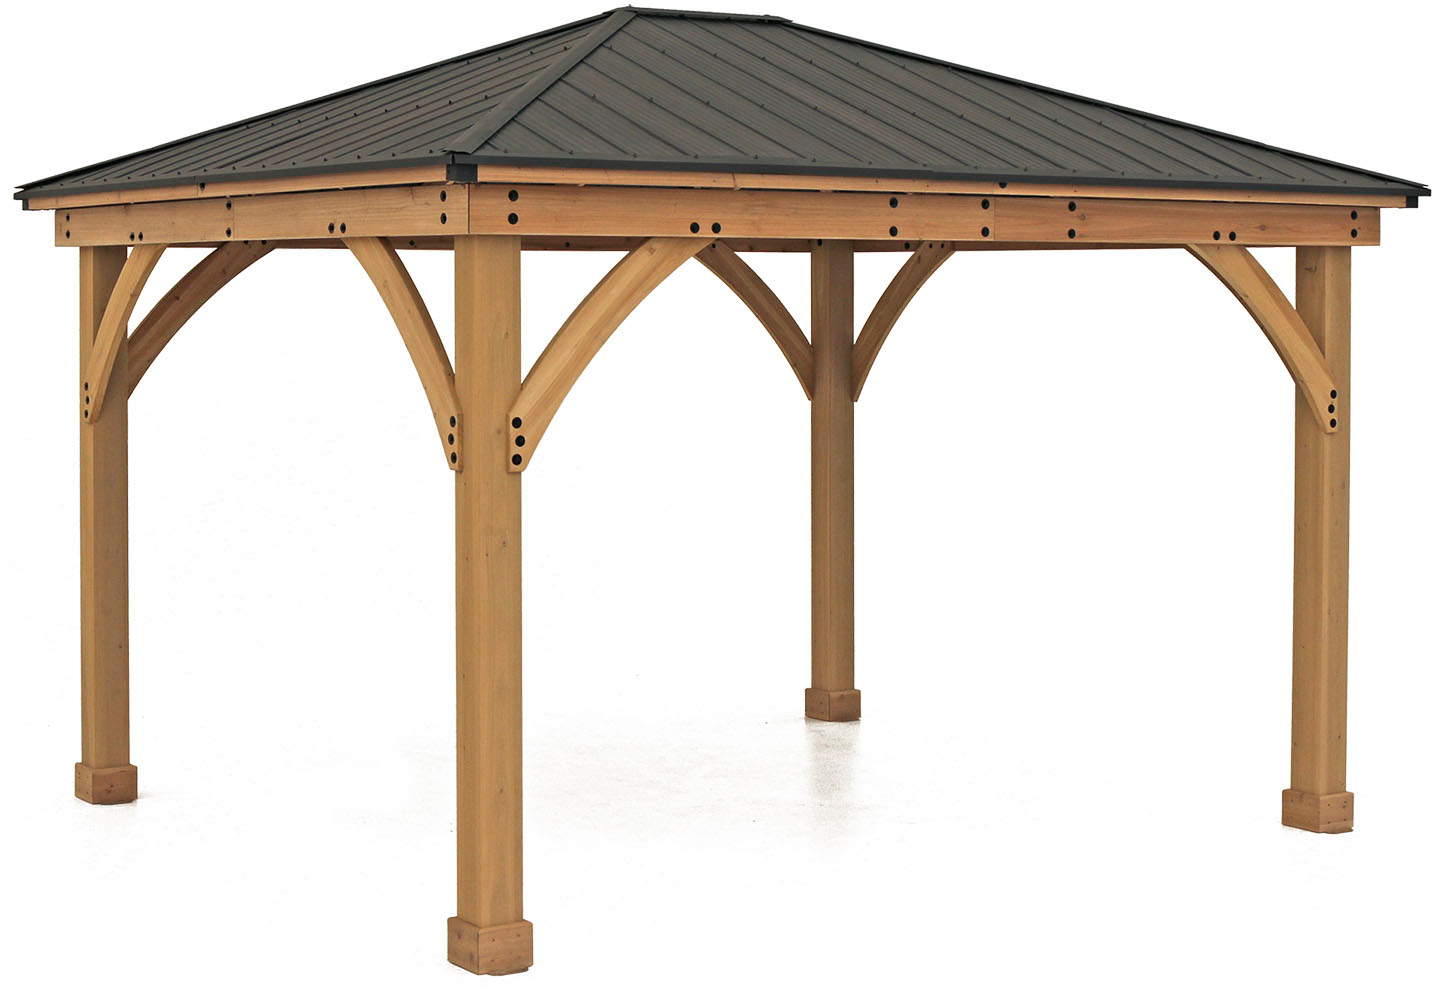 Image of 11' x 13' Meridian Gazebo with Graphite Roof